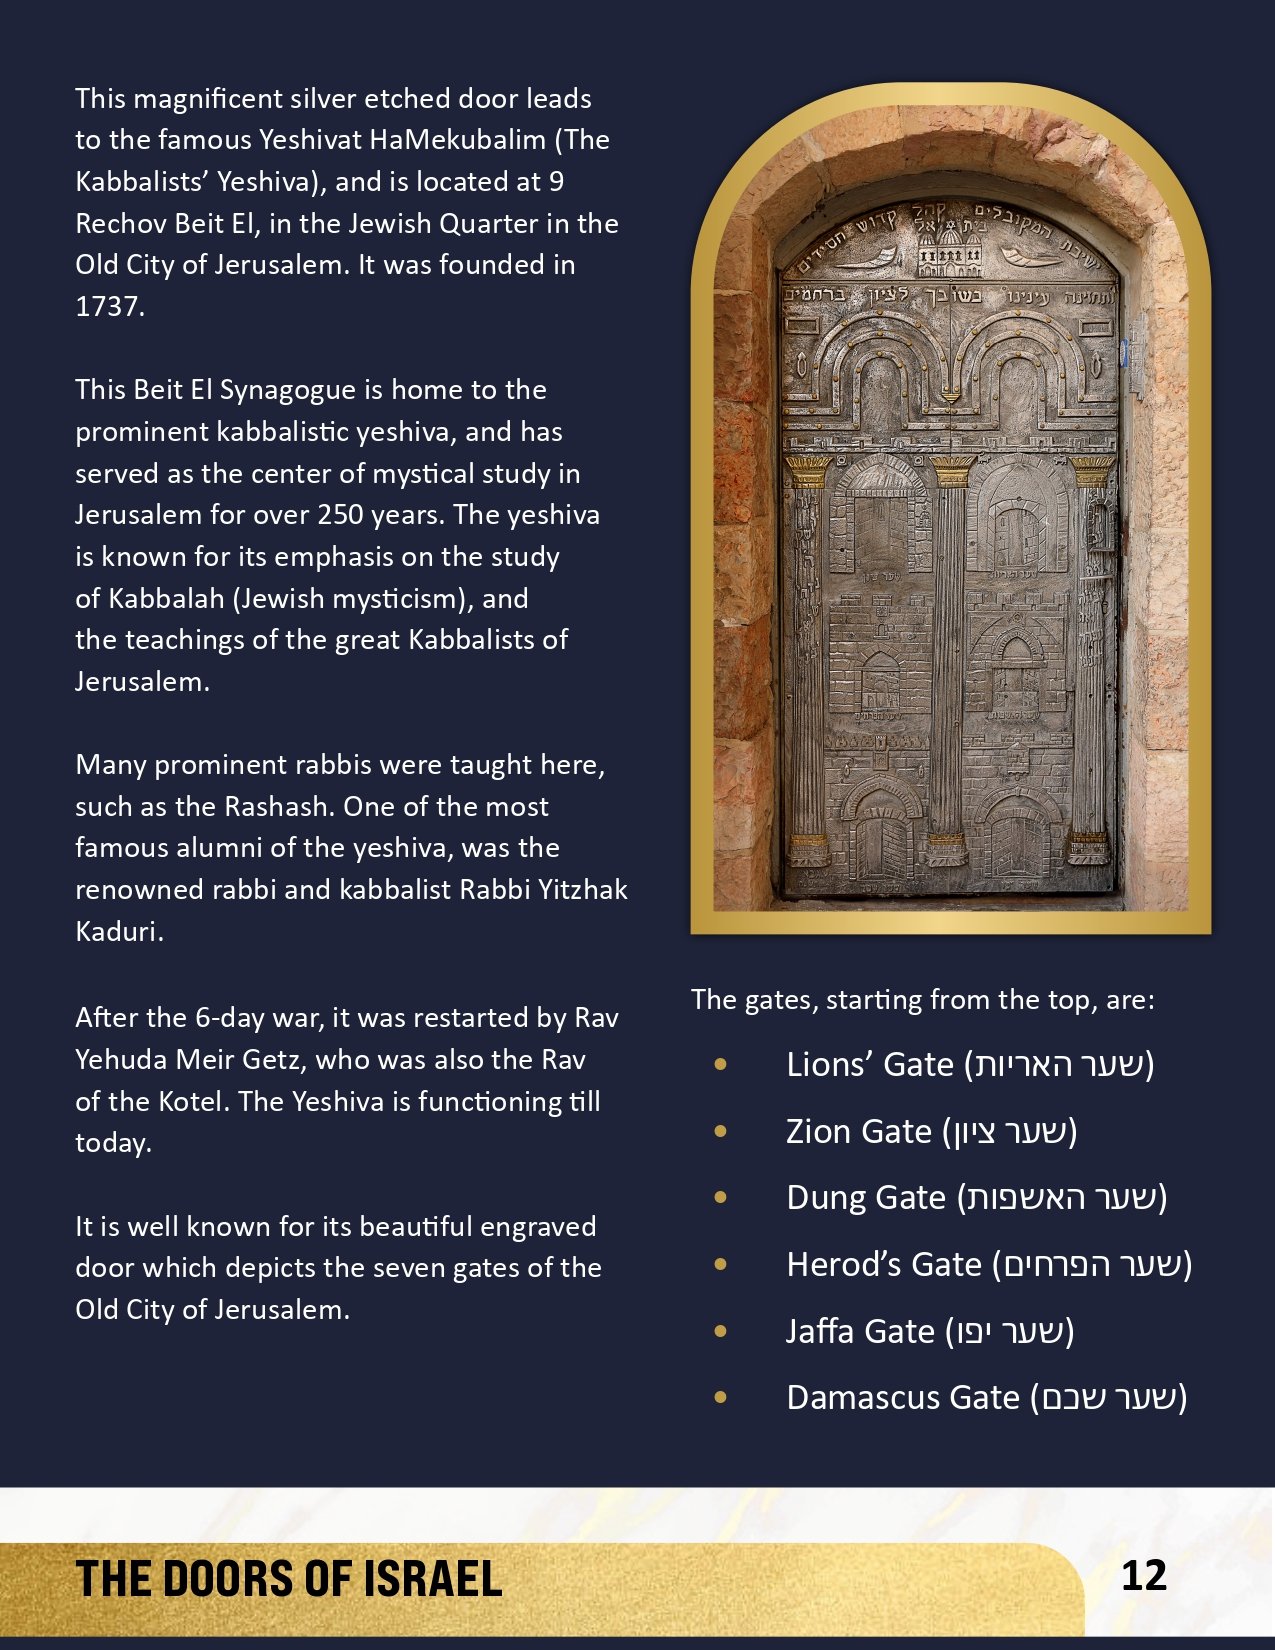 THE DOORS OF ISRAEL-6 INSIDE TEXT-12_page-0001.jpg